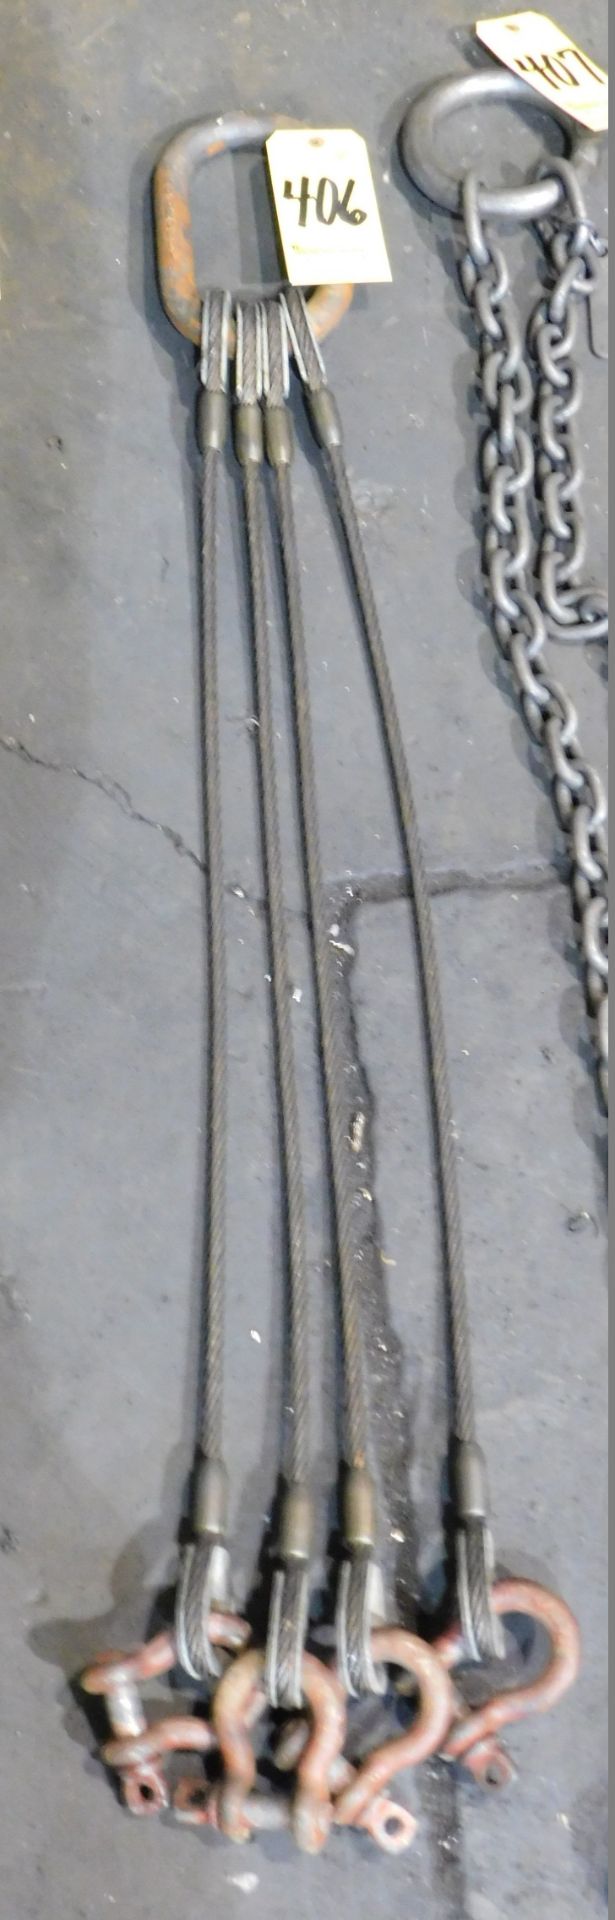 Lifting Cables with Clevices, 4 Ft. Long